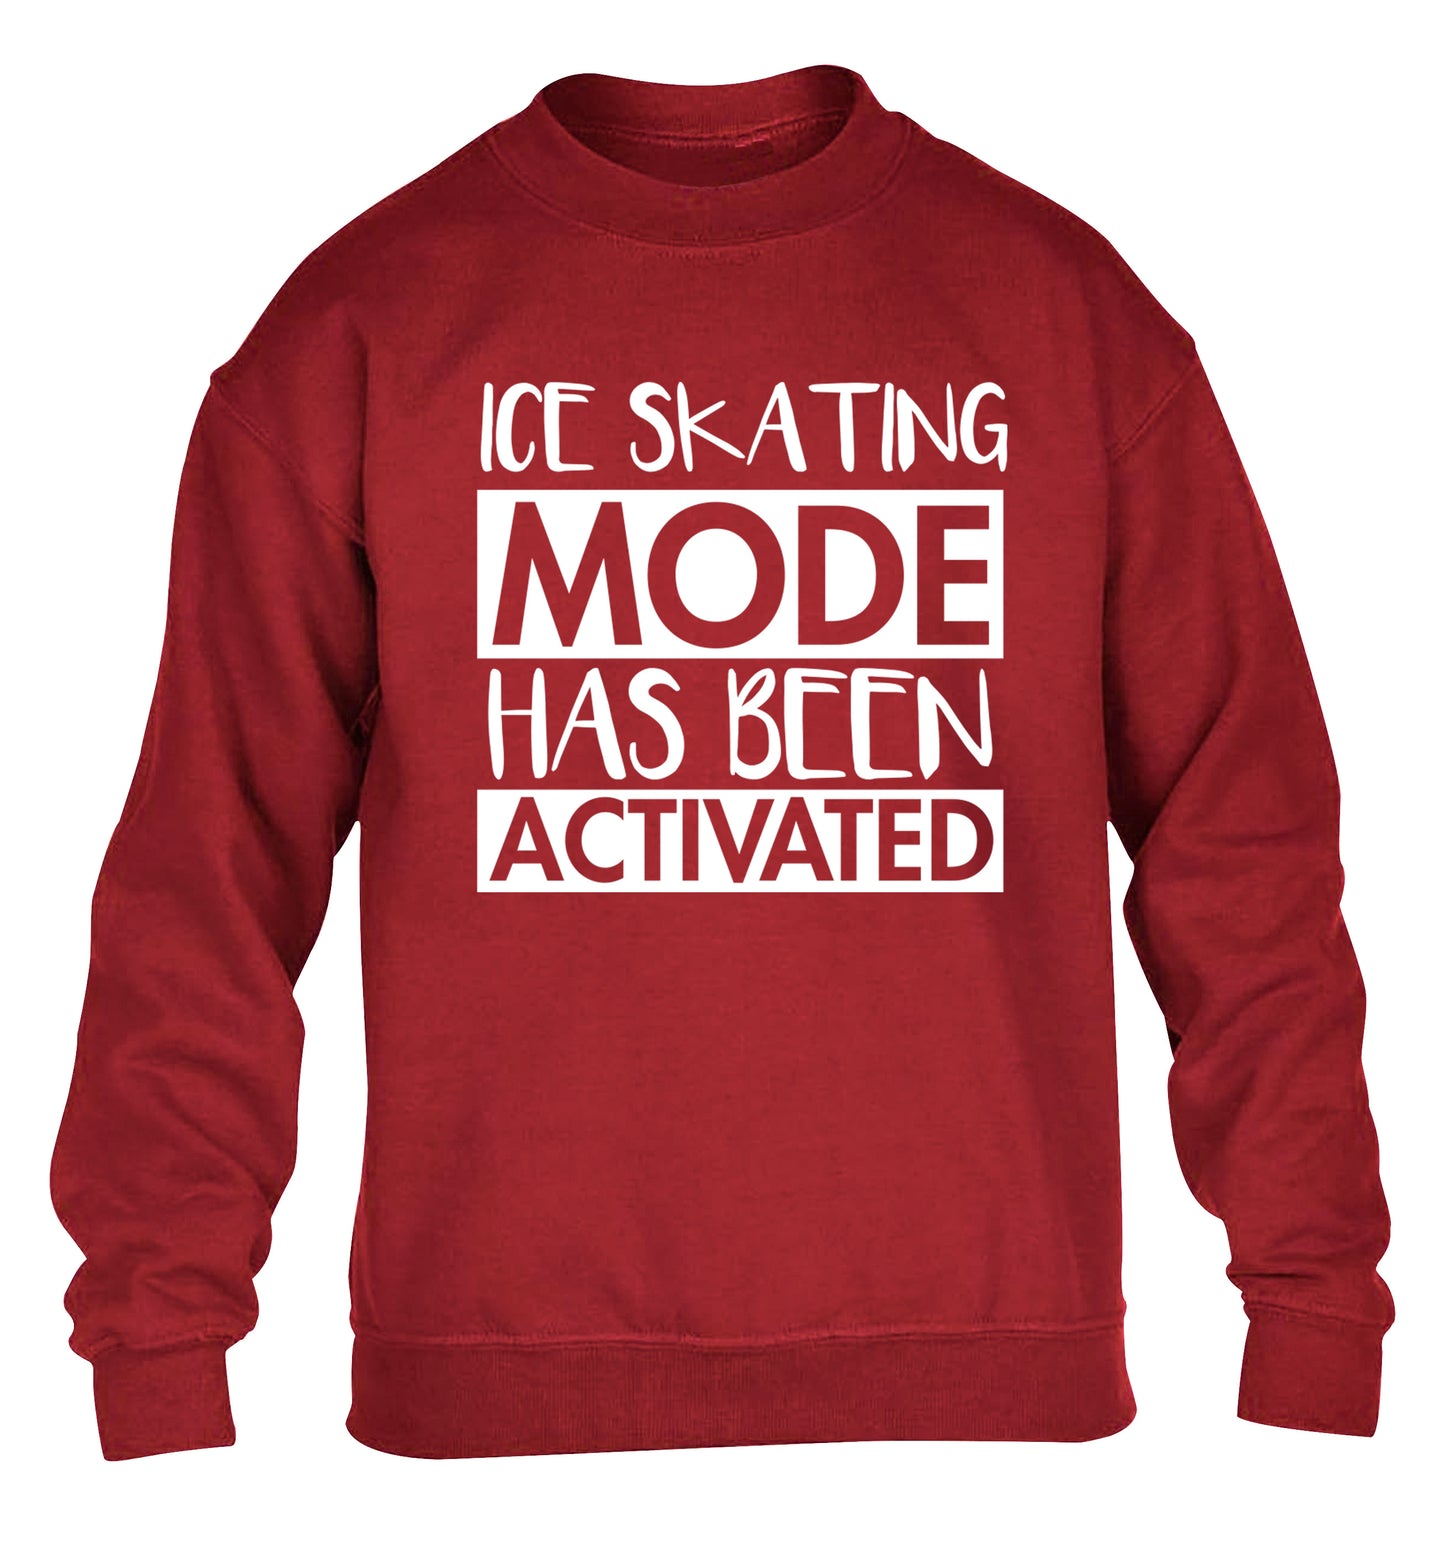 Ice skating mode activated children's grey sweater 12-14 Years